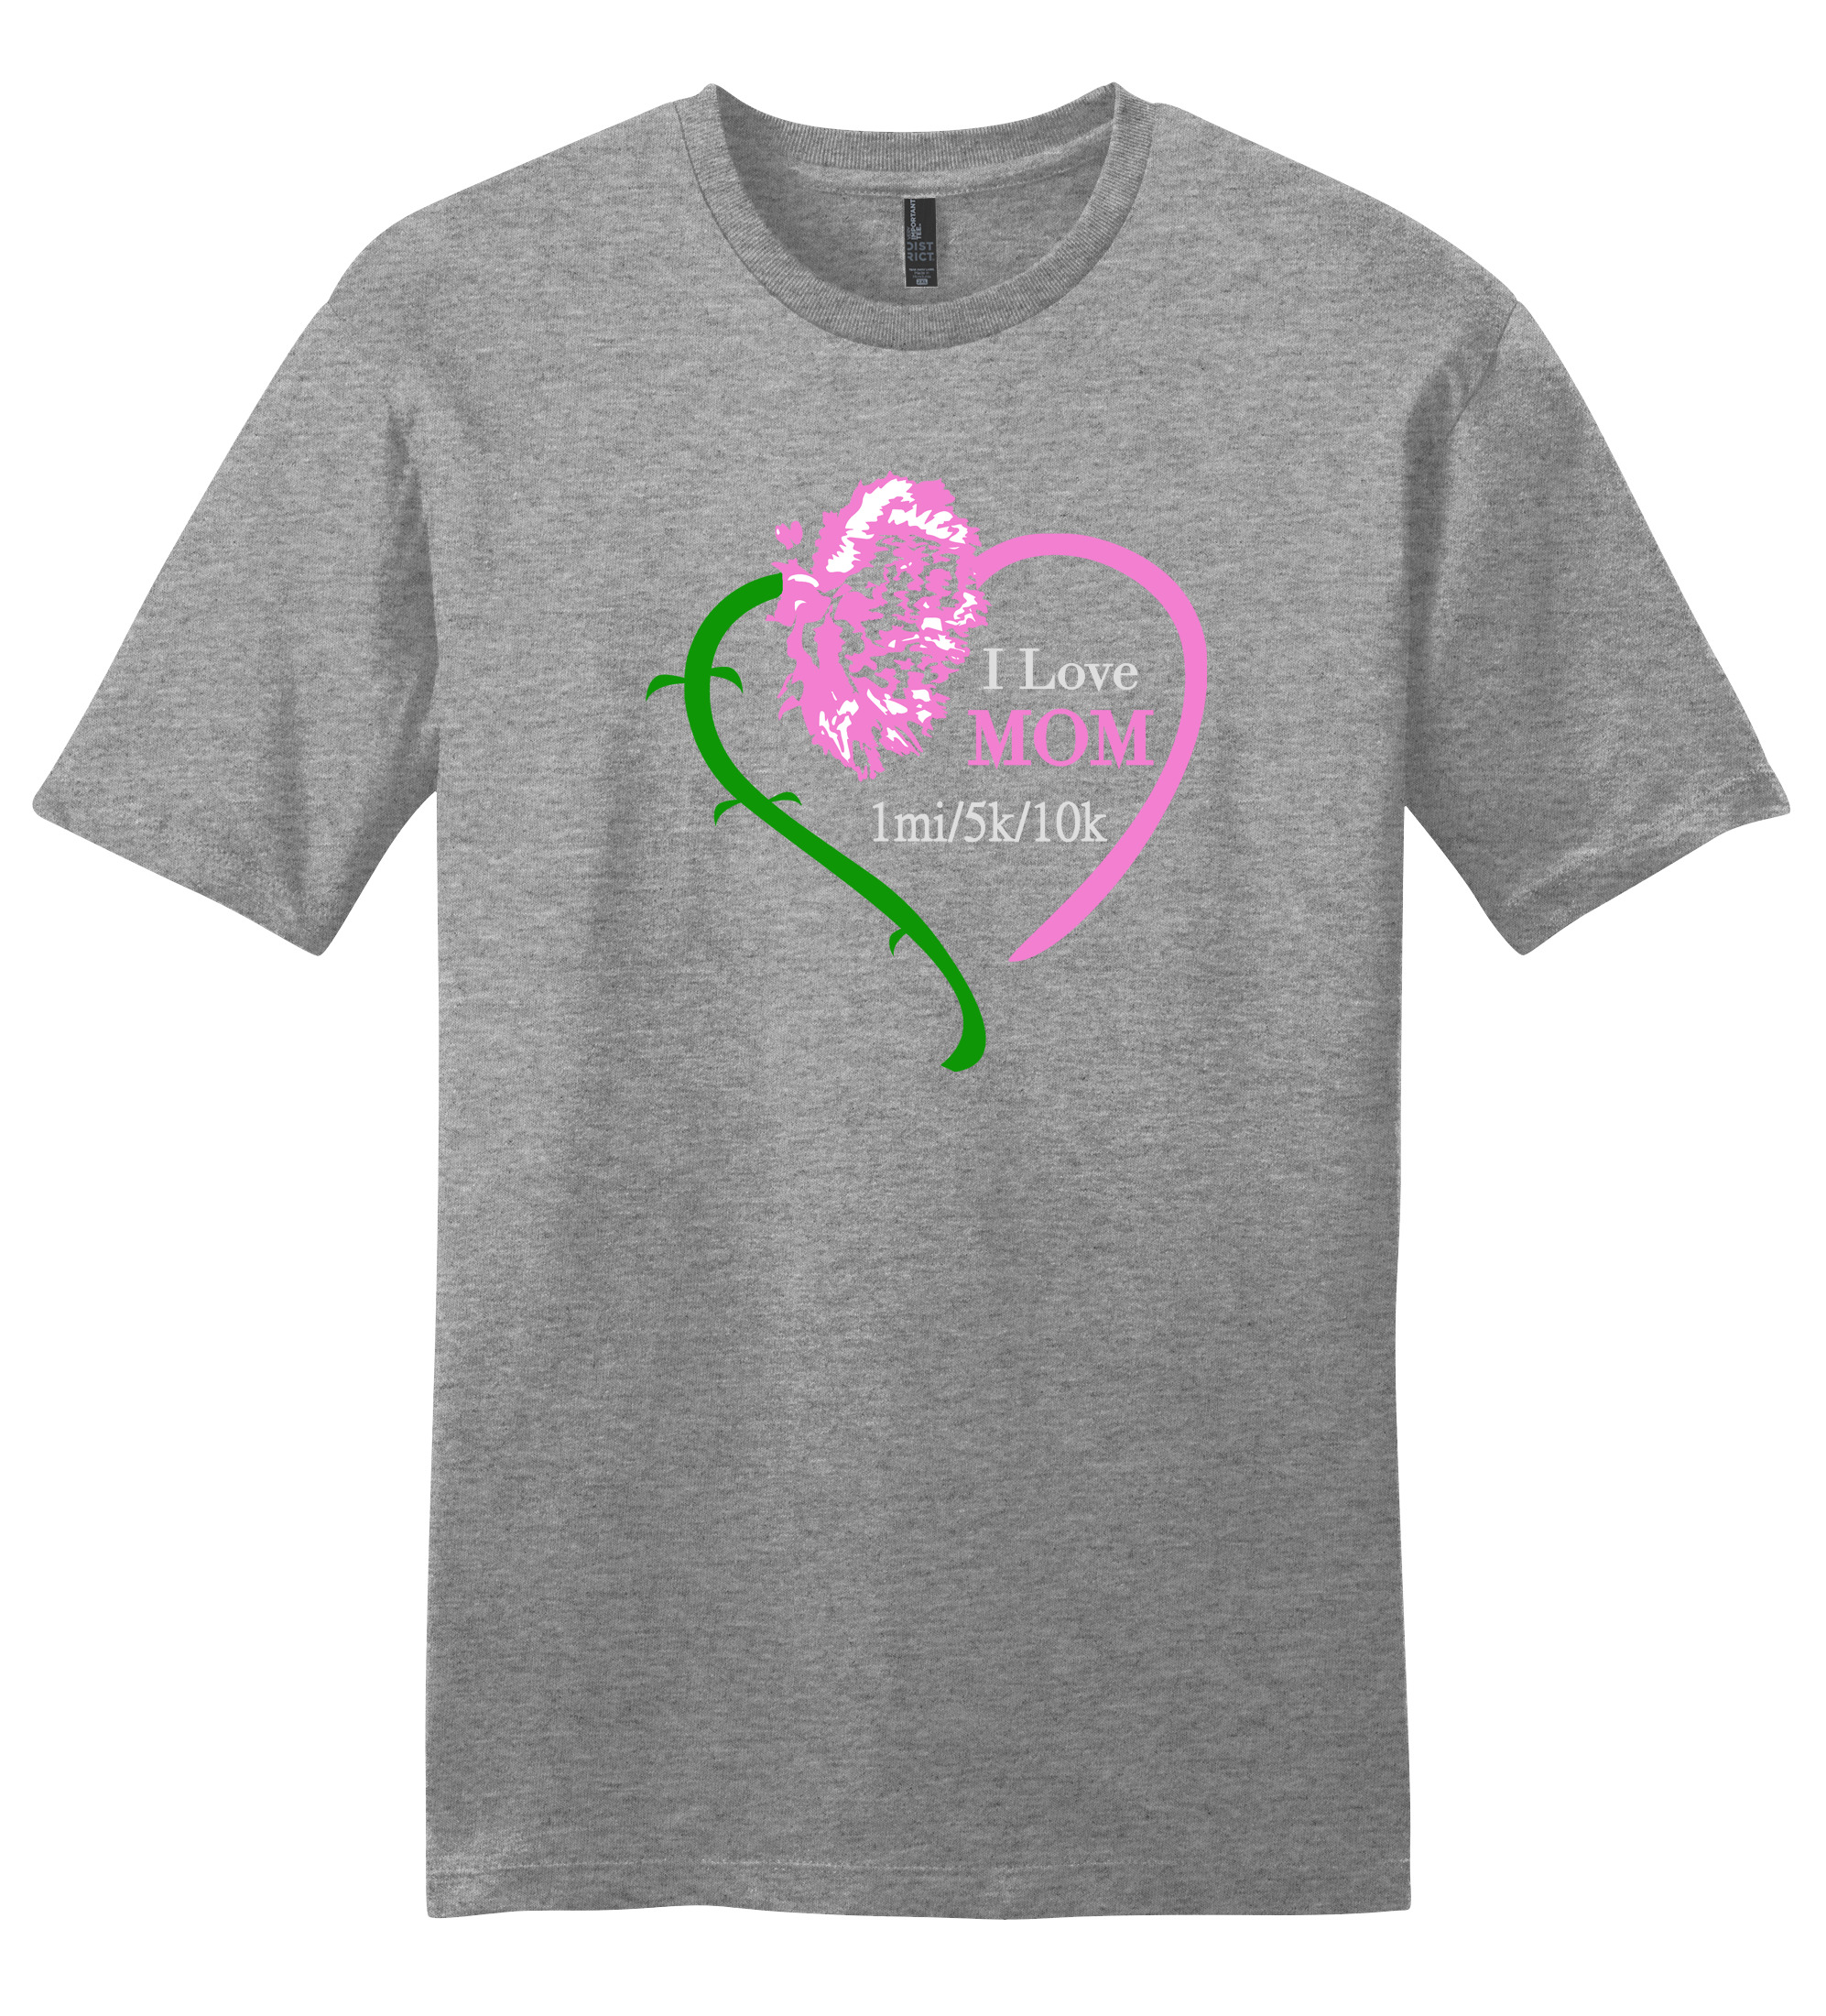 Ohio Mother's Day Races Event Shirt - Great Race Swag - Columbus, Ohio Mothers Day Race - 1 mile, 5k, 10k and Kids Fun Run - USA Race Timing & Event Management